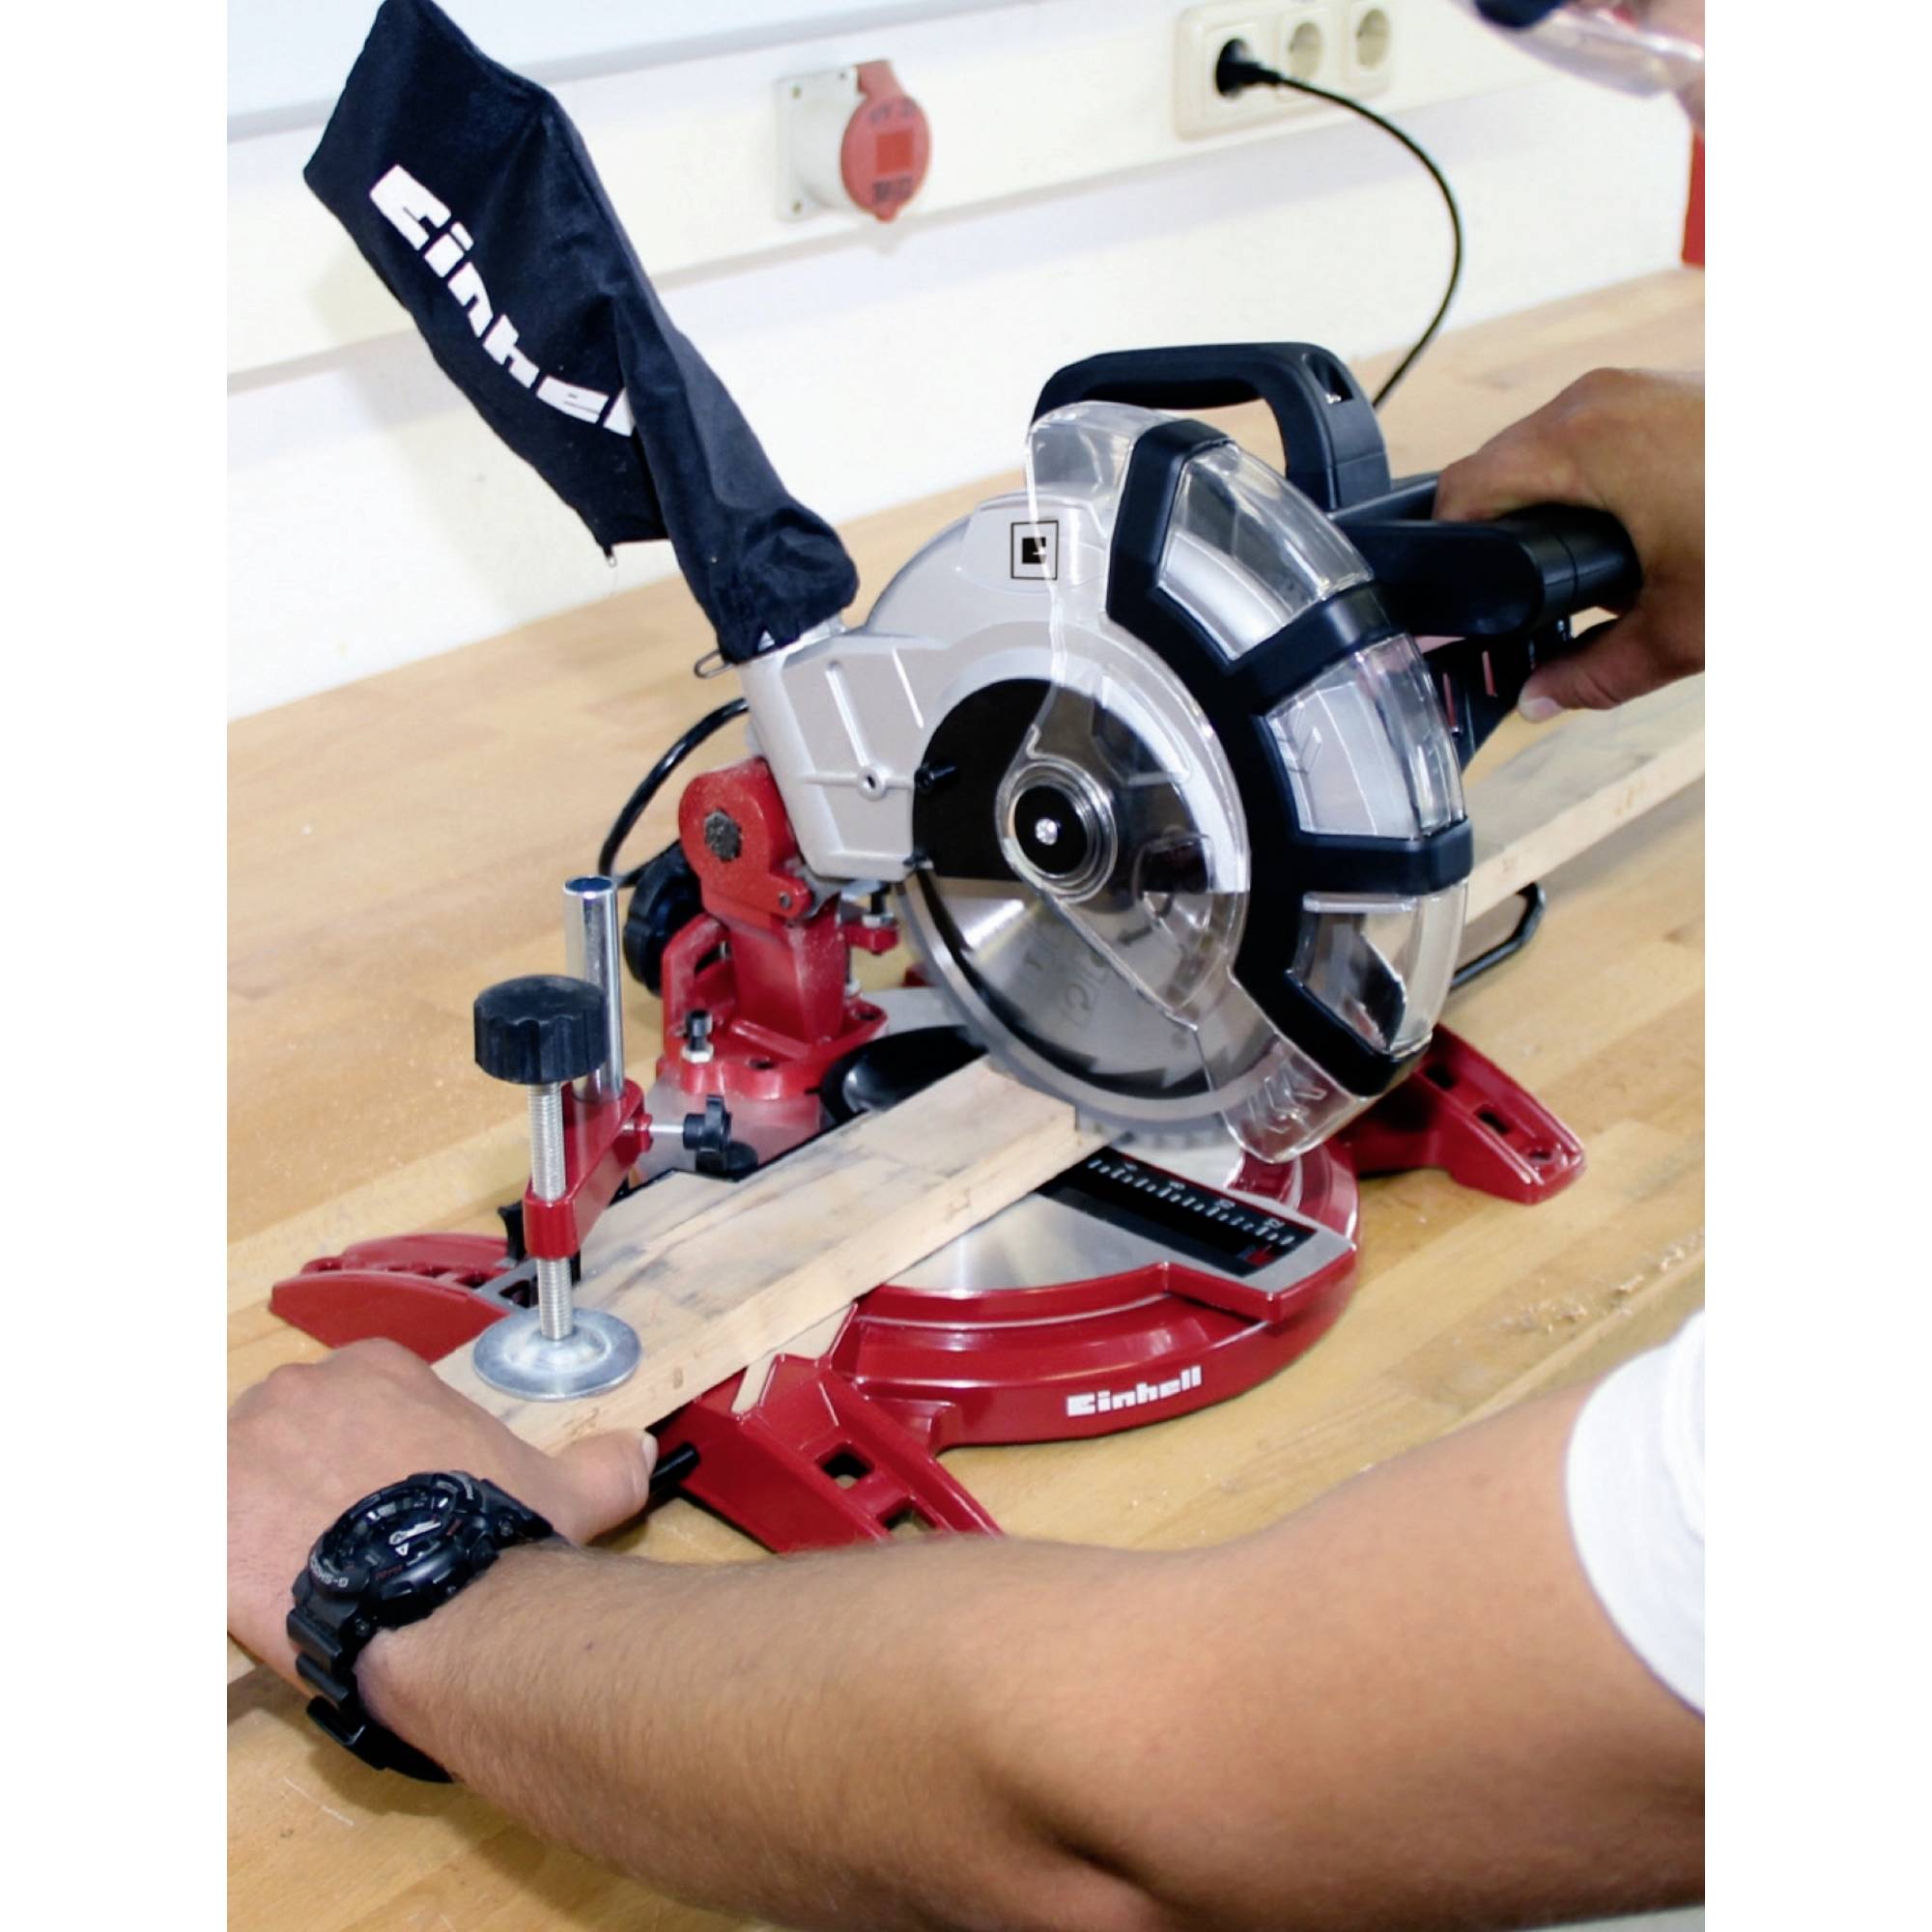 Einhell Mitre Saw TC-MS 2112 Power Tool Services